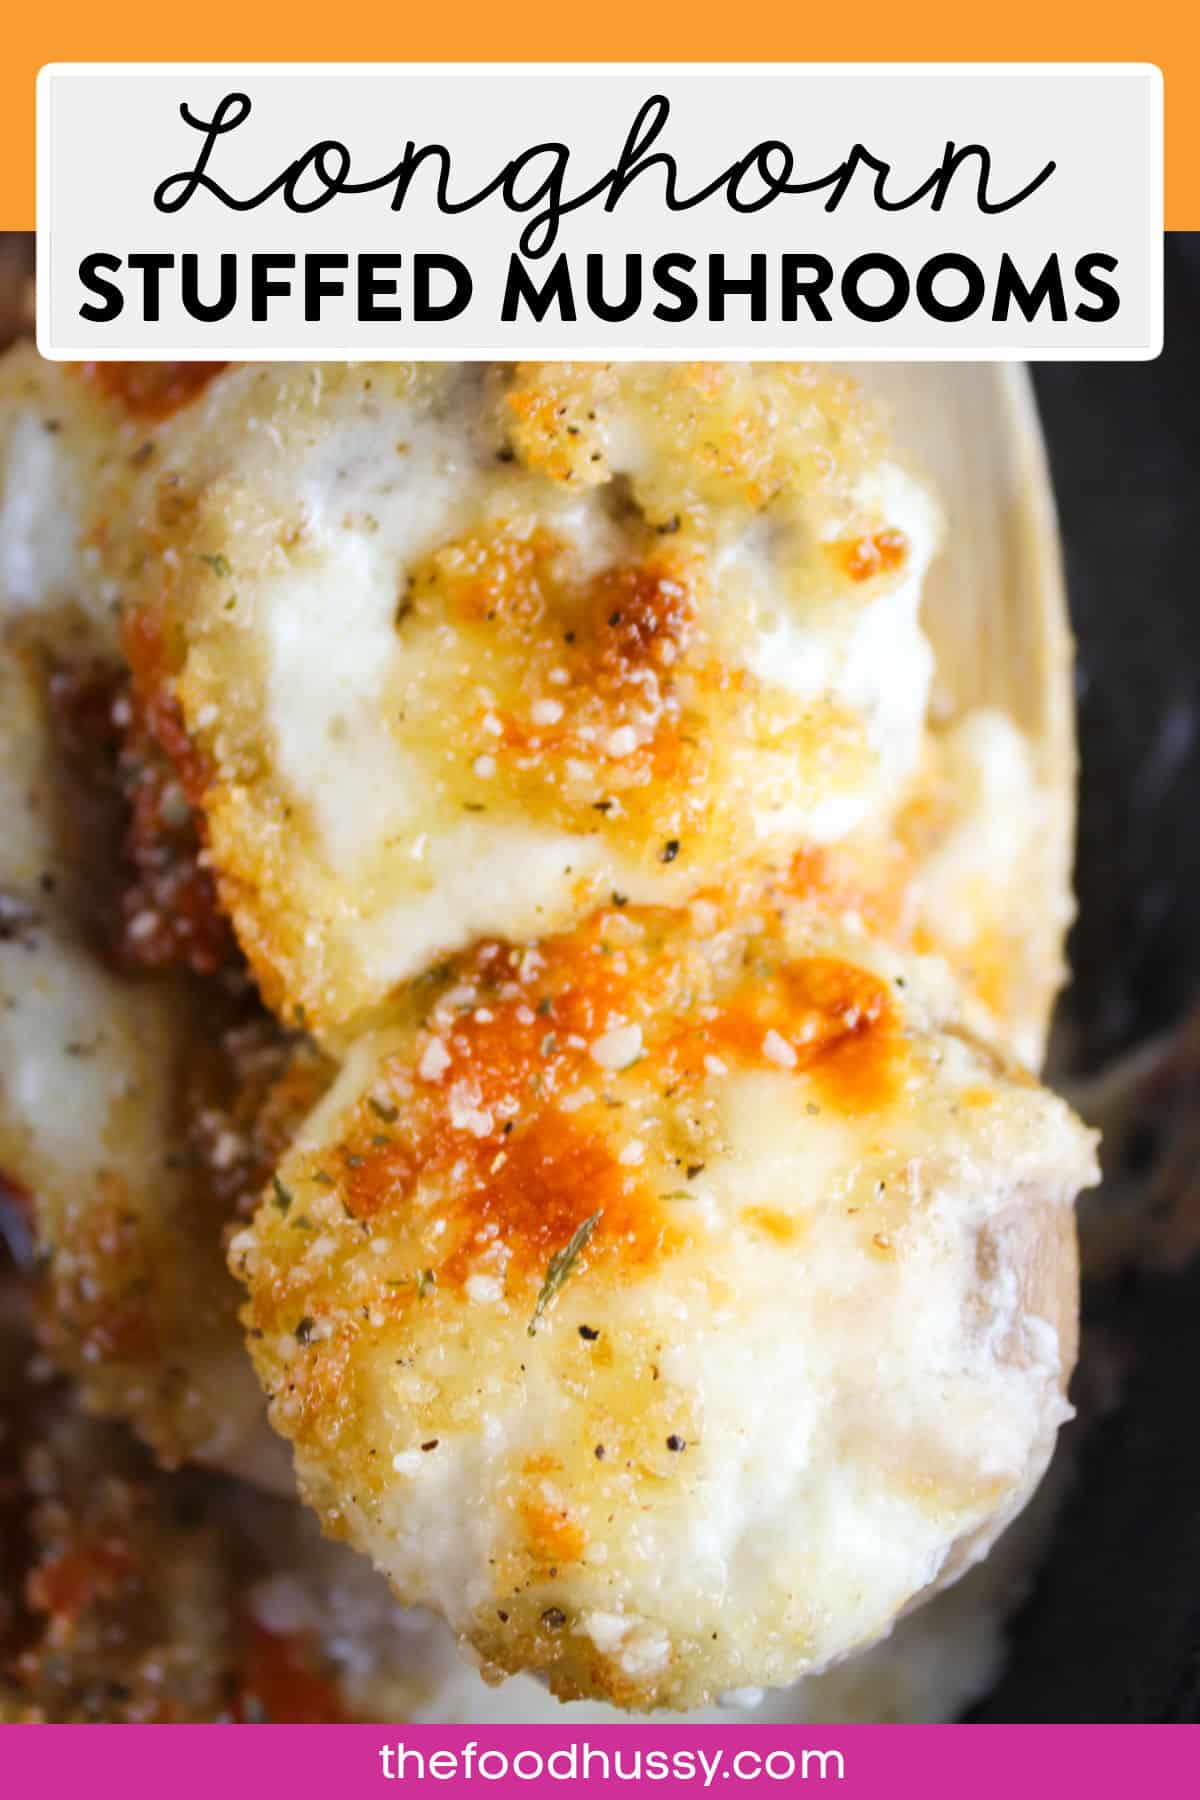 Longhorn Stuffed Mushrooms are a delicious side dish or appetizer! This Longhorn Copycat of these vegetarian mushrooms are LOADED with white cheddar cheese and a creamy Alfredo sauce! via @foodhussy